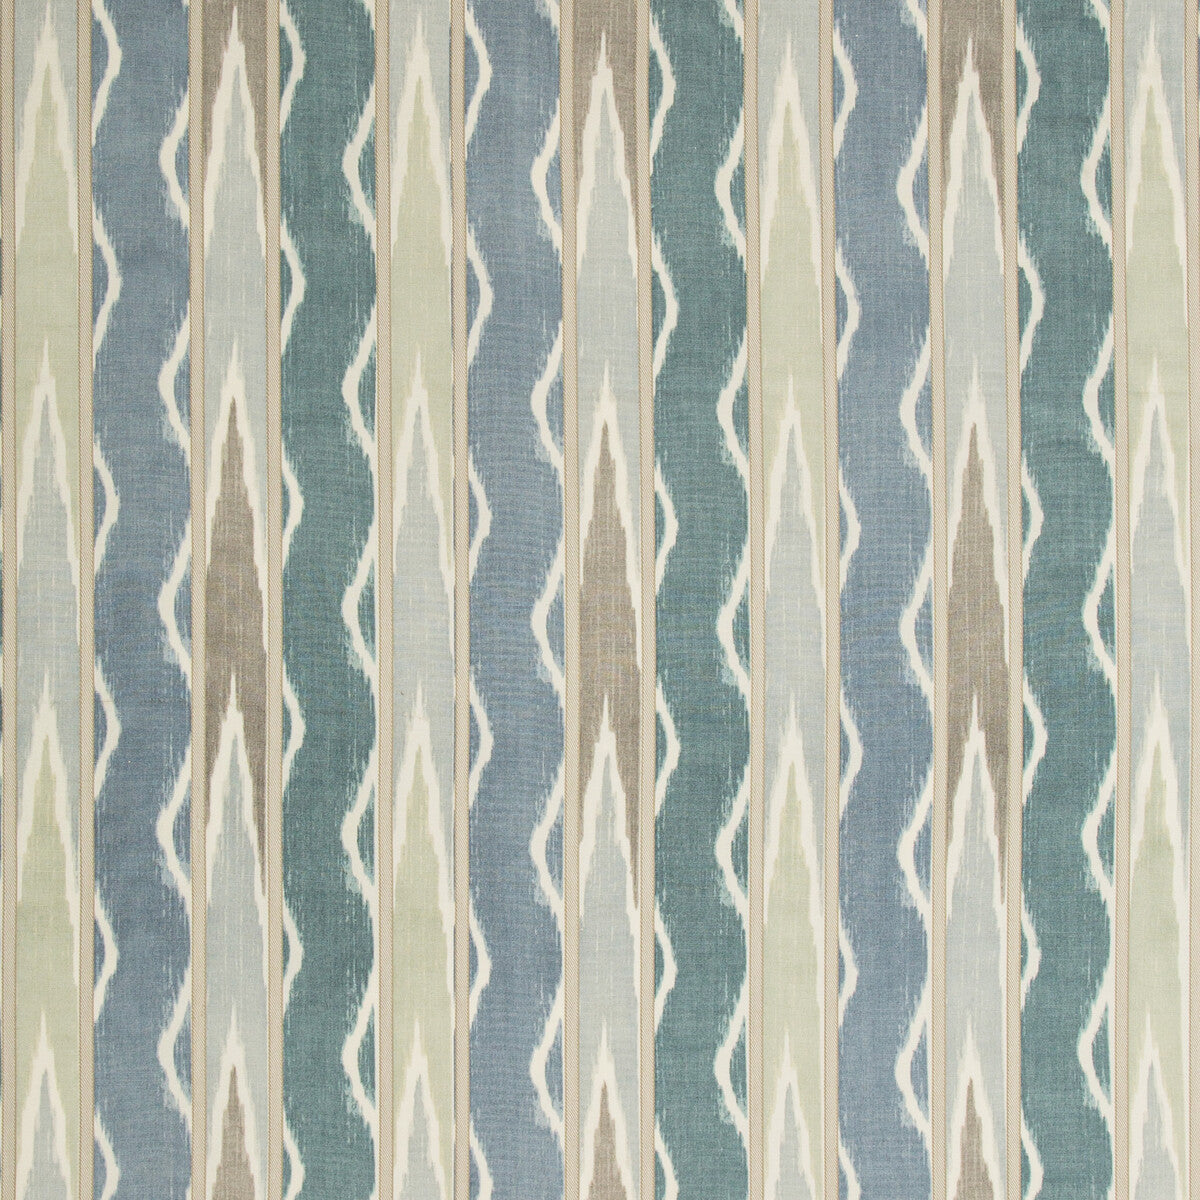 Ubud fabric in seaglass color - pattern UBUD.15.0 - by Kravet Couture in the Modern Colors-Sojourn Collection collection